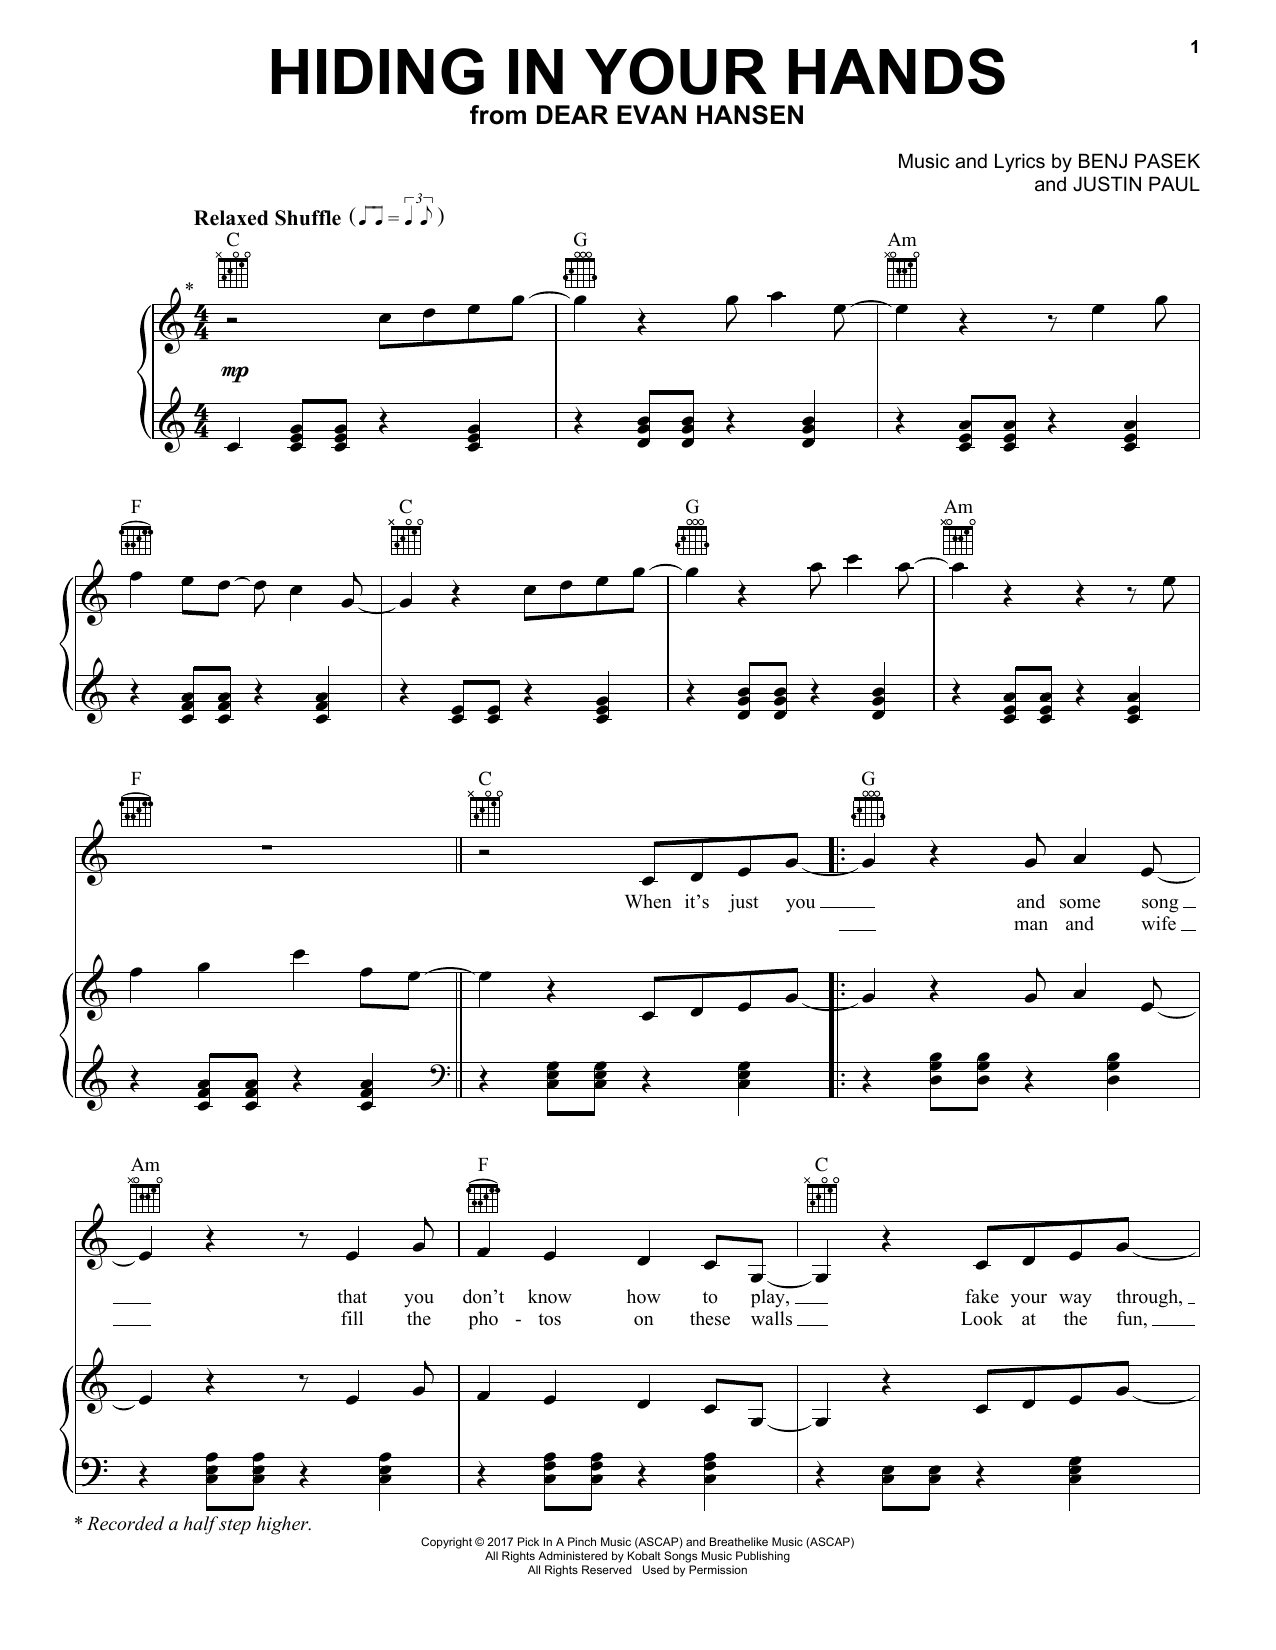 Pasek & Paul Hiding In Your Hands (from Dear Evan Hansen) sheet music preview music notes and score for Piano, Vocal & Guitar (Right-Hand Melody) including 7 page(s)